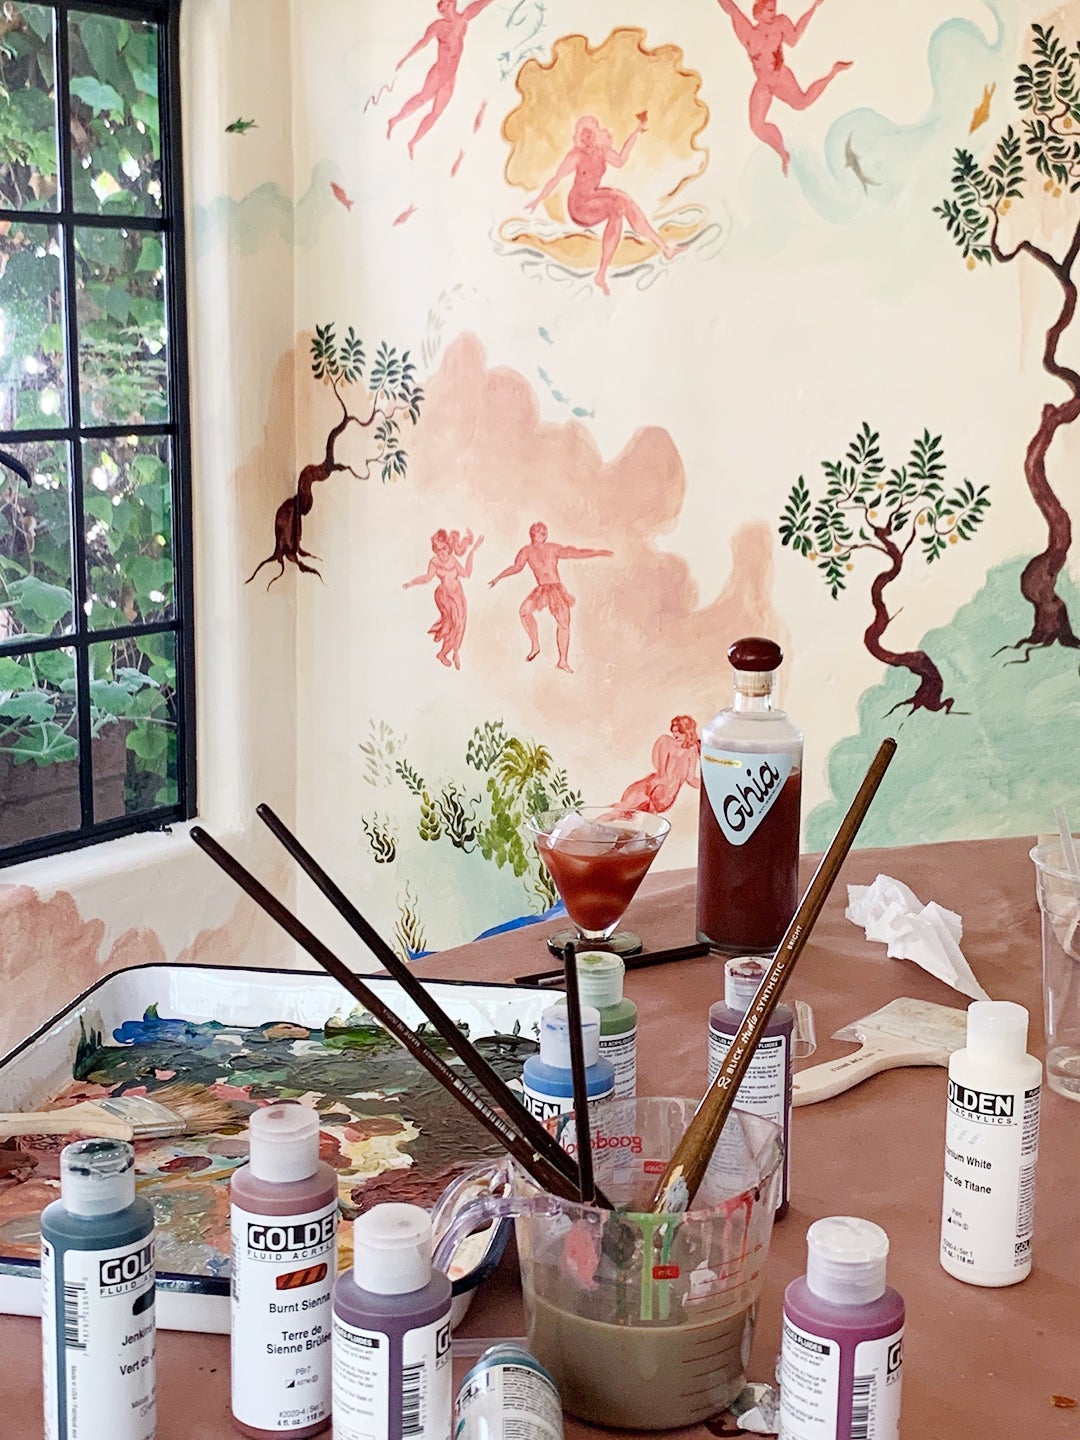 Mural in progress with paintbrushes